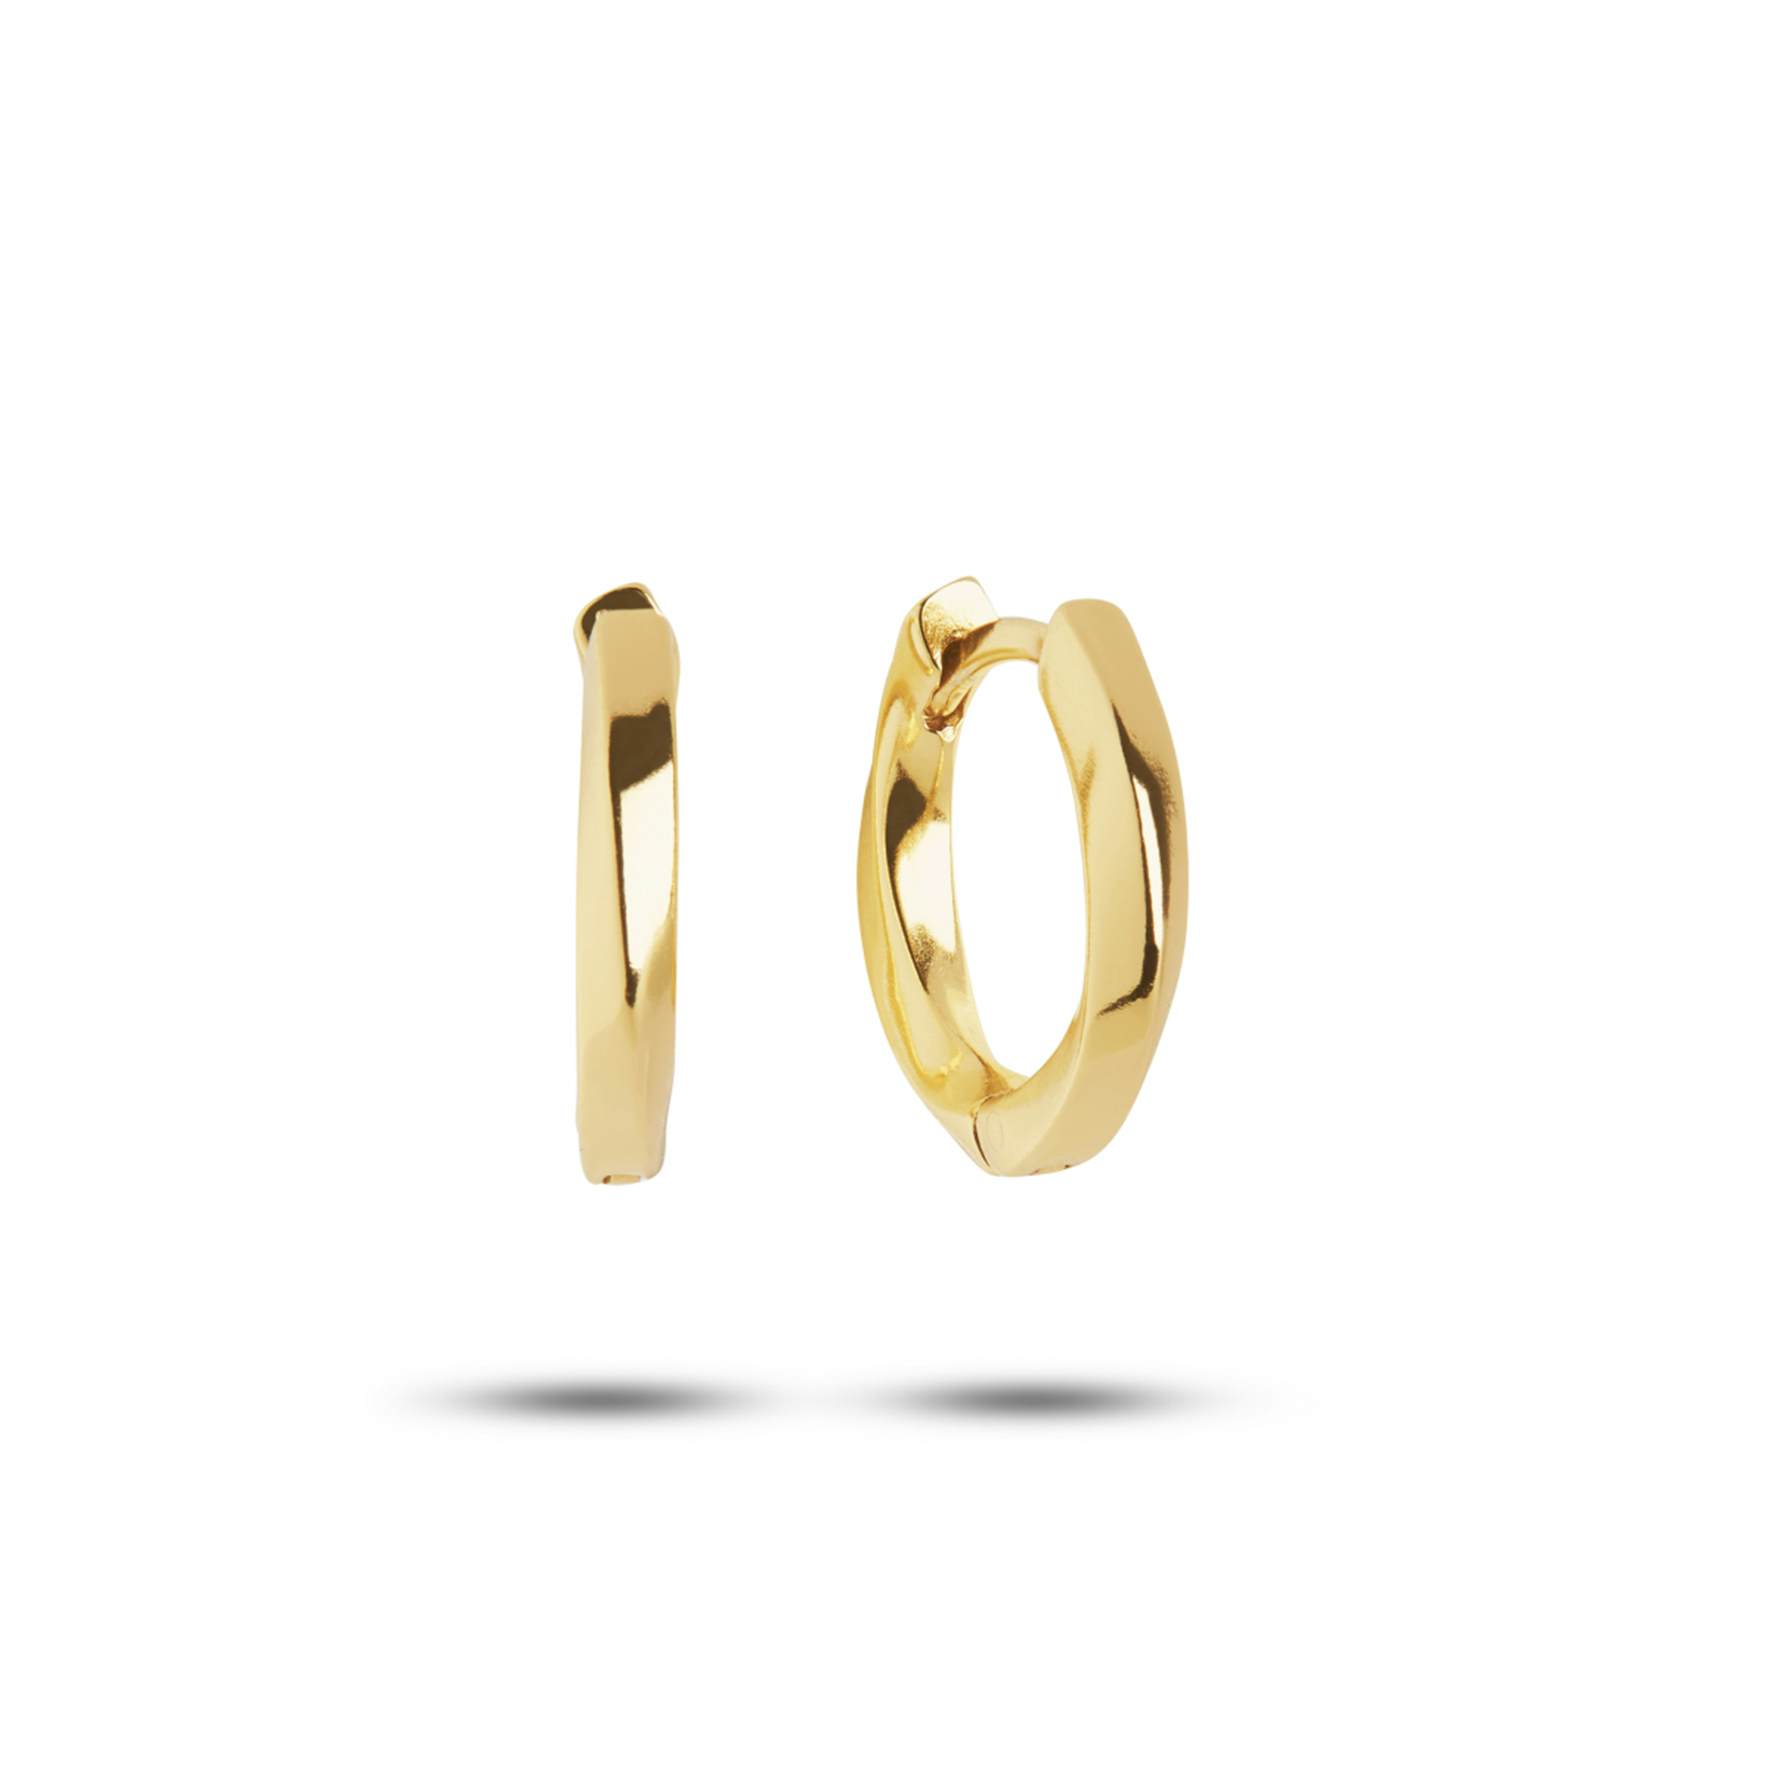 Classic Twist Hoops from Carré in Goldplated-Silver Sterling 925|Blank